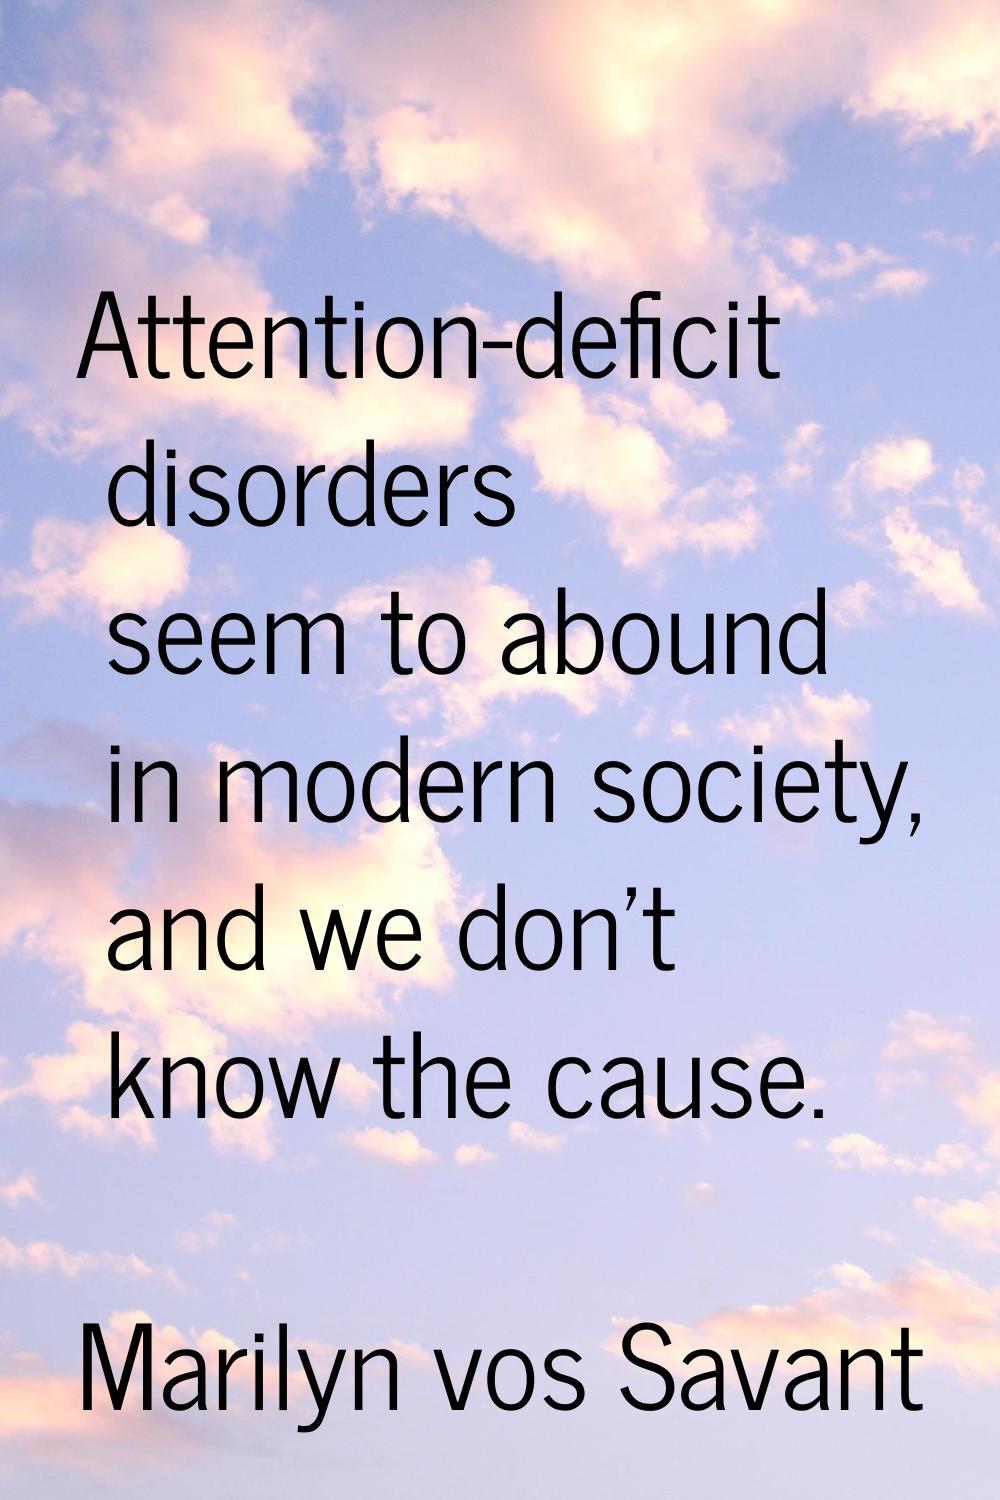 Attention-deficit disorders seem to abound in modern society, and we don't know the cause.